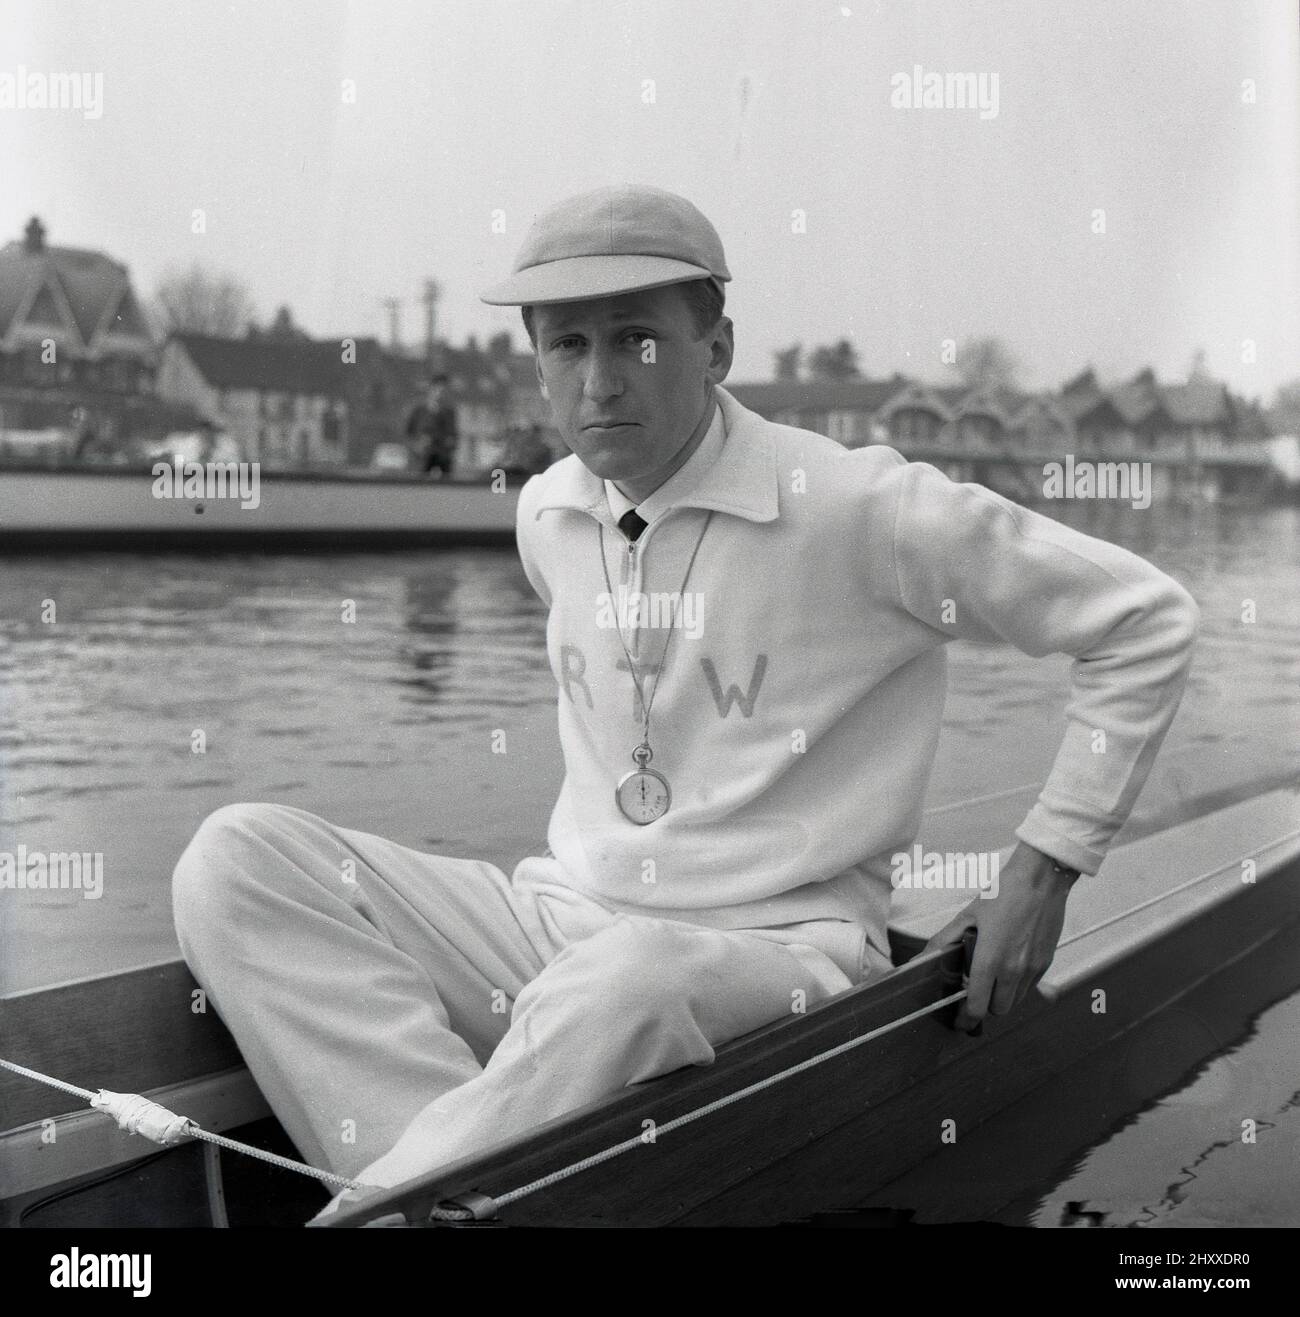 1961, historical, sitting in a rowing boat on the water, the coxswain or cox of the Cambridge University Boat team, R. T. Weston of Selwyn college, with cap and stopwatch. The initals RTW are embrodied on his cotton tracksuit top. Roger Weston had also been the Cambridge cox the previous year. The Oxford & Cambridge Boat Race, the famous university rowing race, first took place 1829 and is an annaul event on the River Thames over the championship course between Putney and Barnes in South West London. Stock Photo